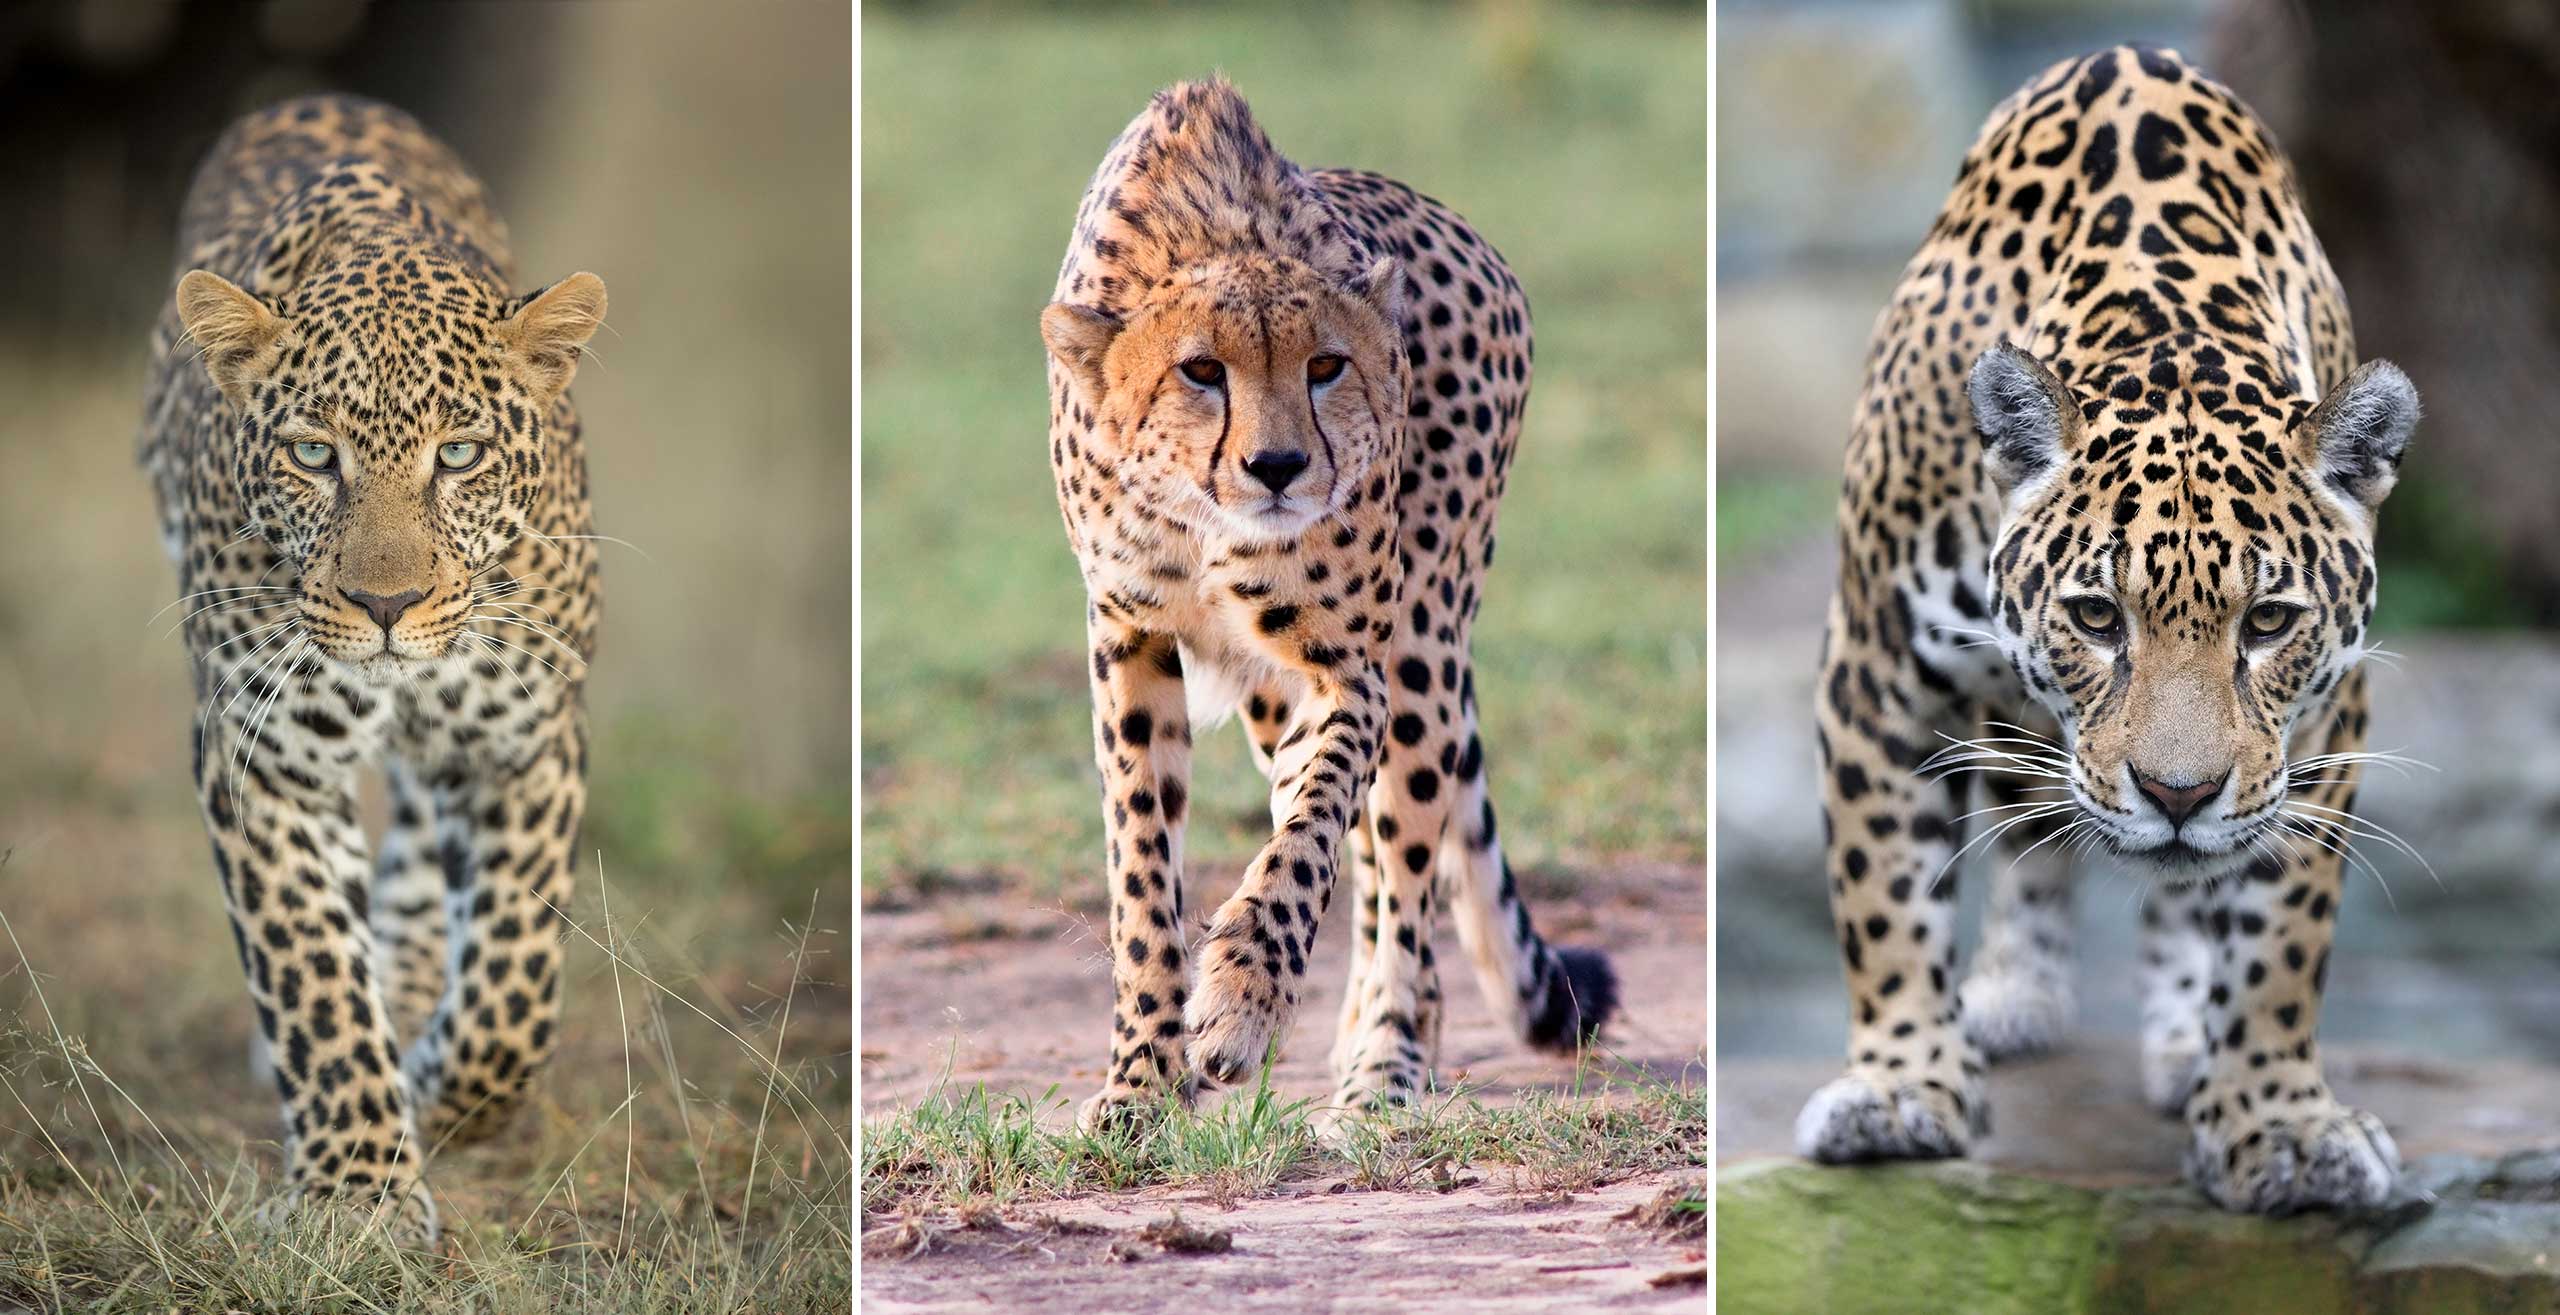 If a jaguar, a cheetah, and a leopard would race each other, who would win?